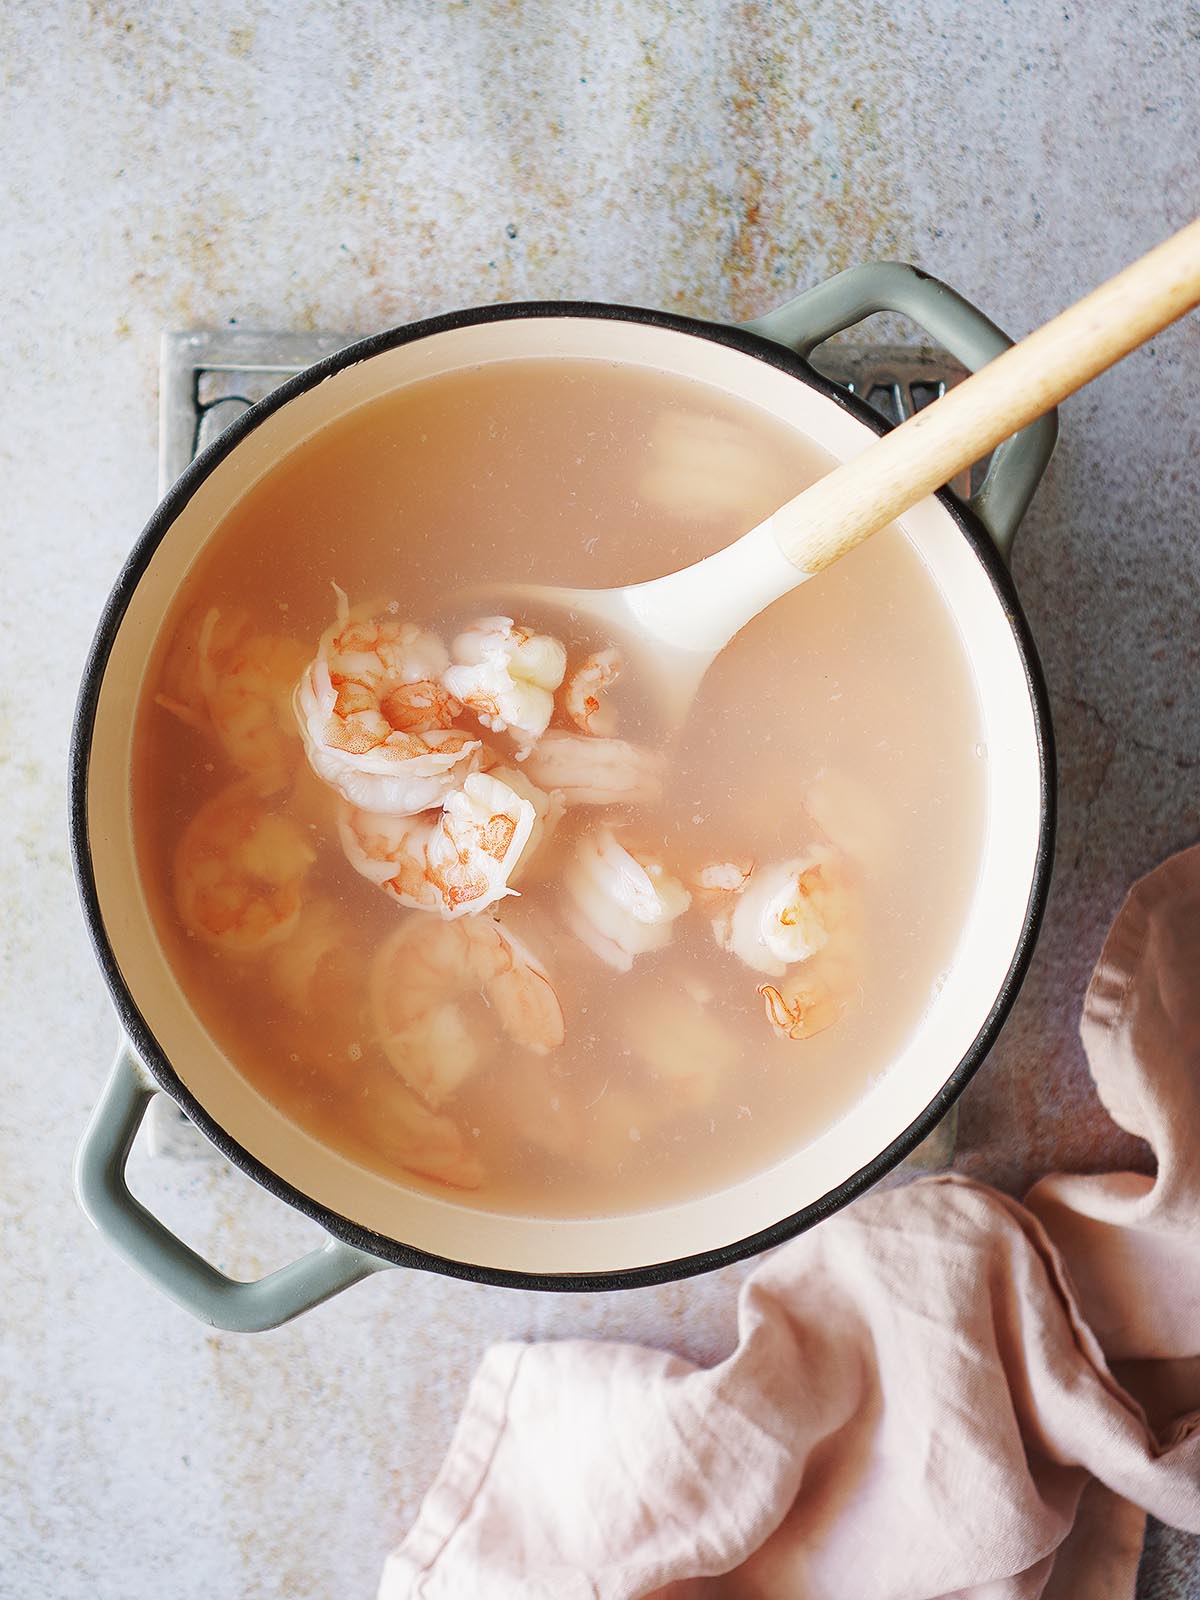 Boil shrimp in a small saucepan with a cooking spoon inside.